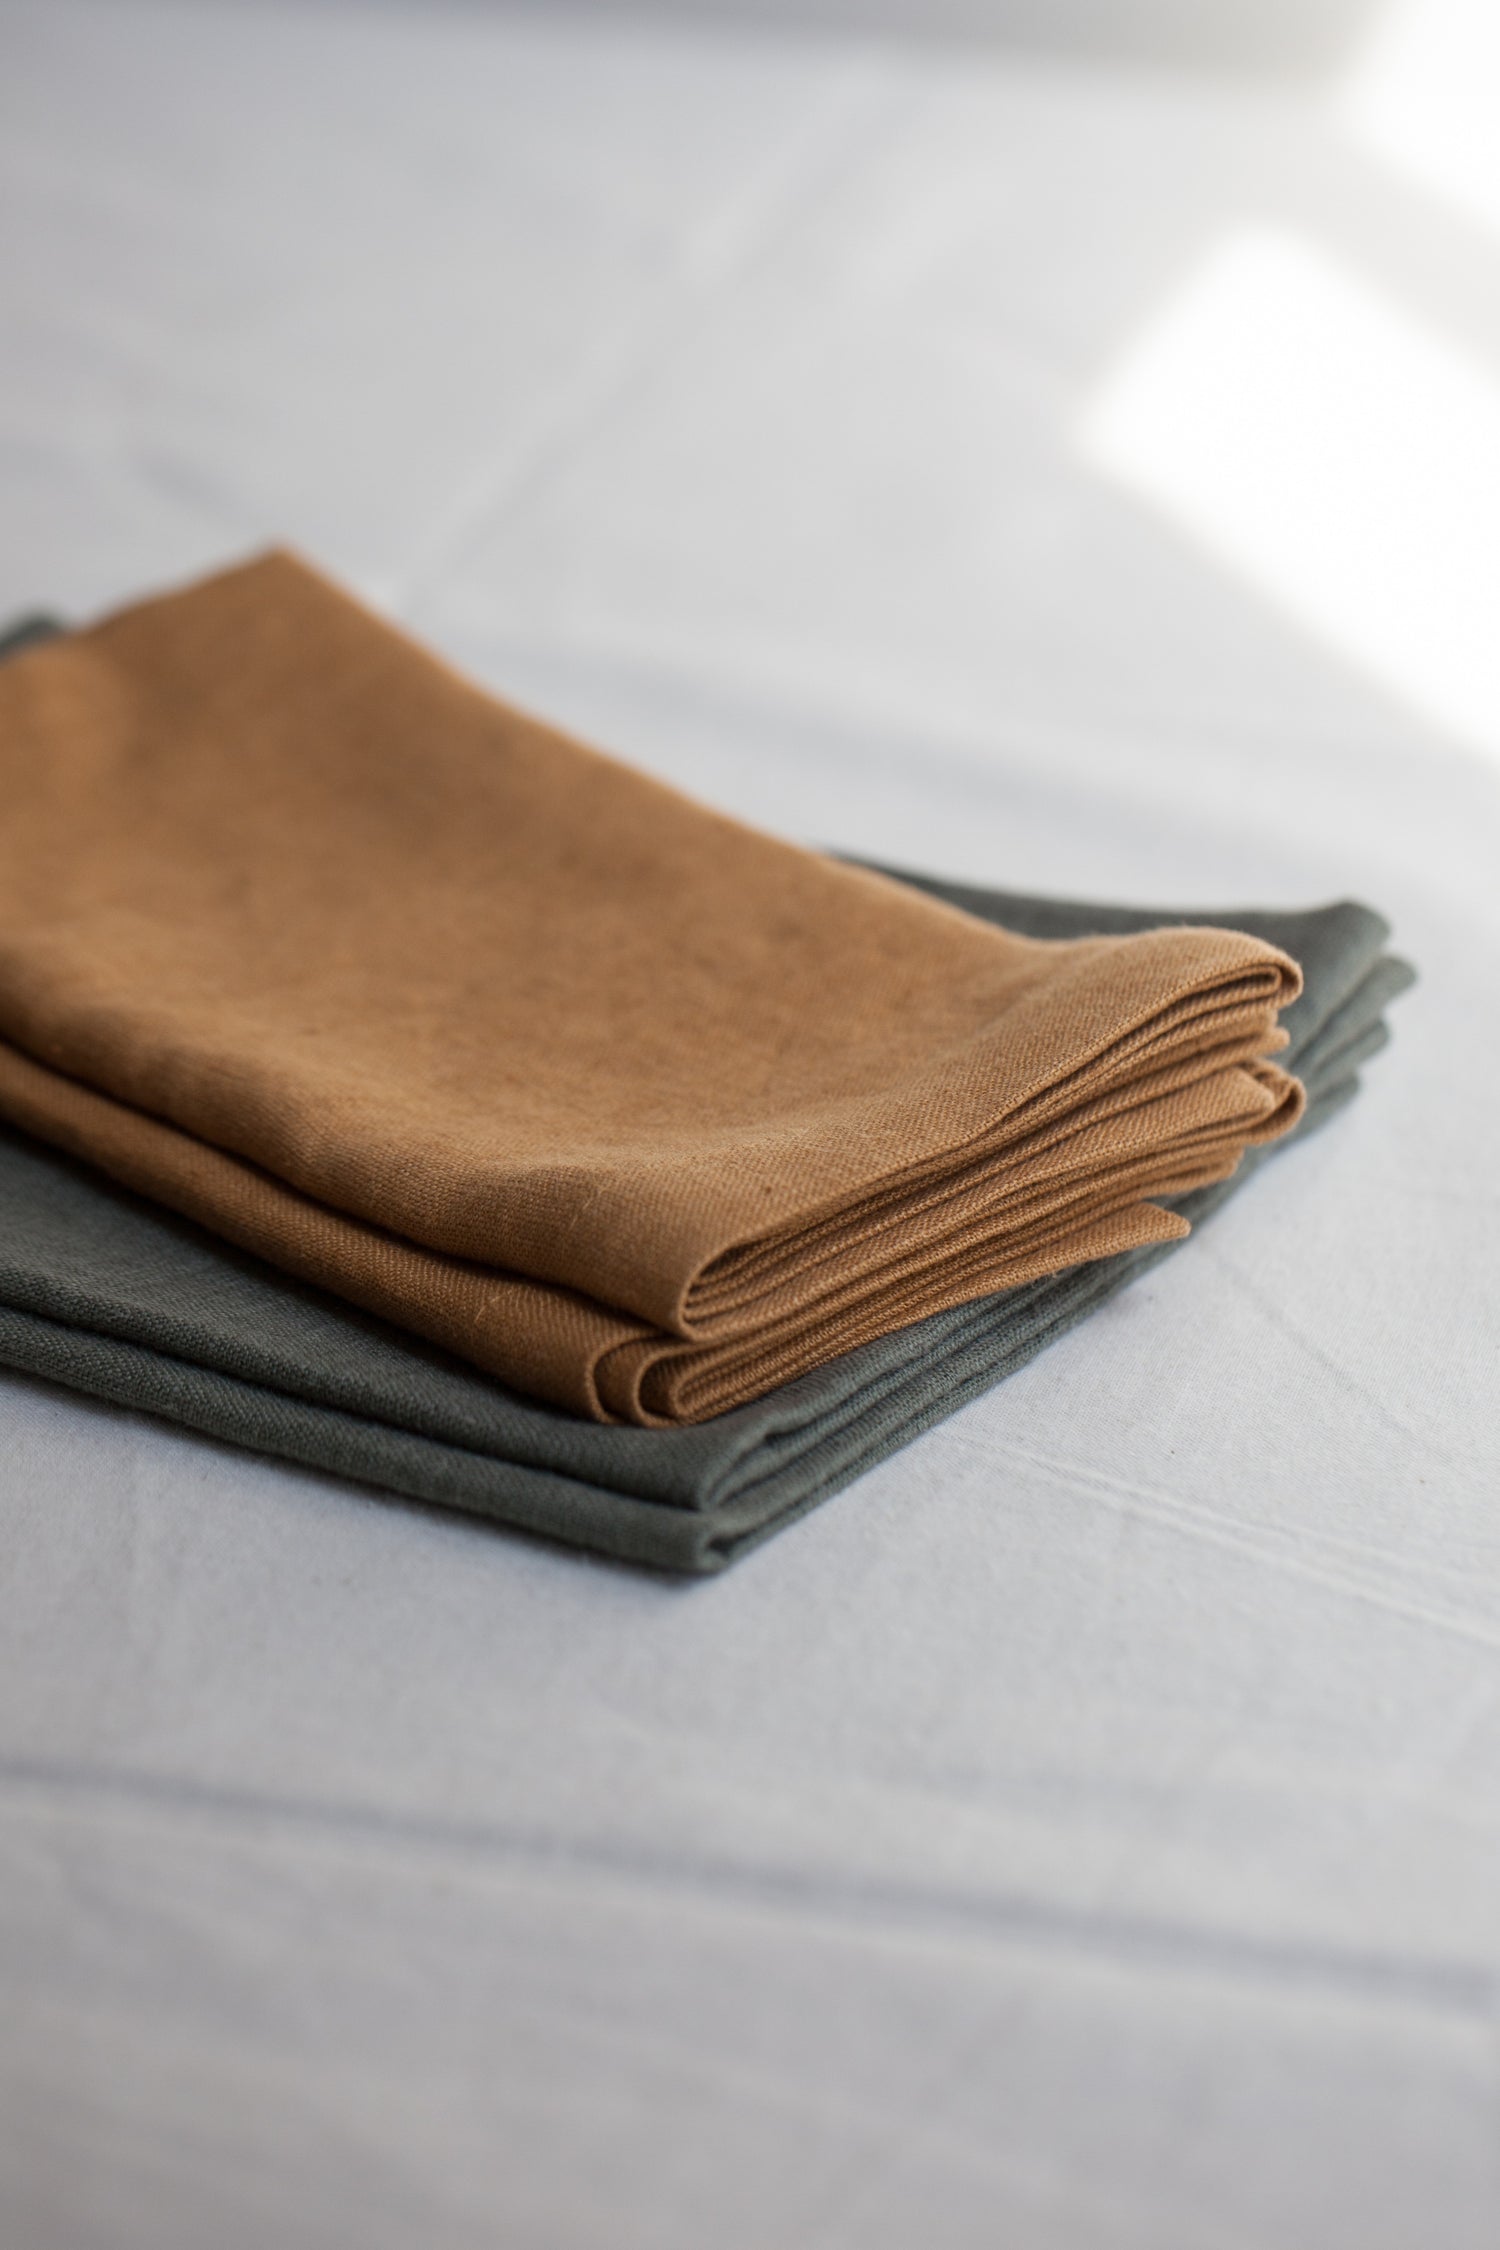 Linen Napkin by Timeless Linen Dusty Caramel and Green Sage